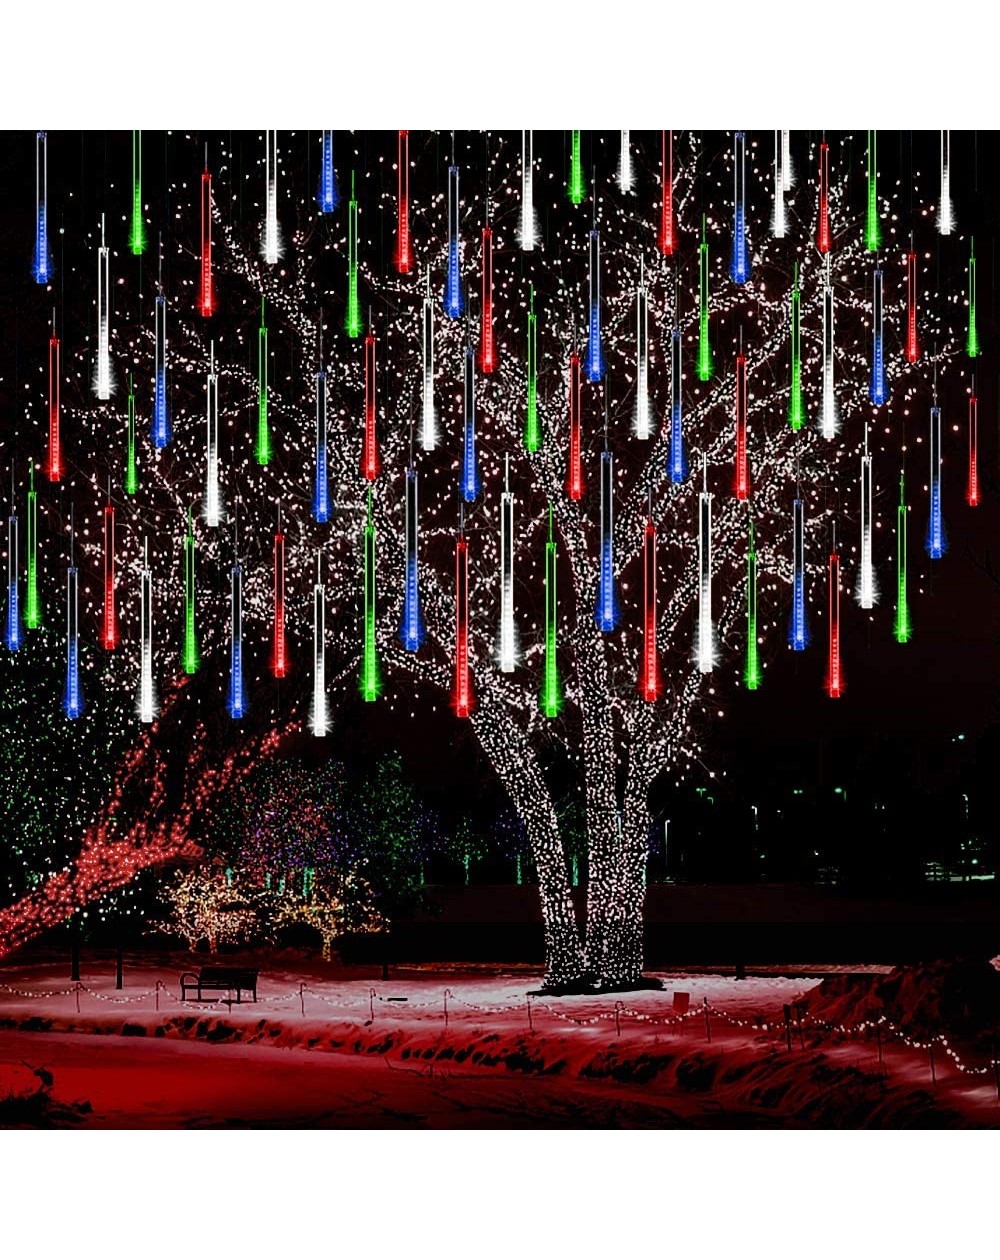 Outdoor String Lights Meteor Shower Lights Christmas Lights Outdoor 12 inch 8 Tubes LED Falling Rain Lights Icicle Cascading ...